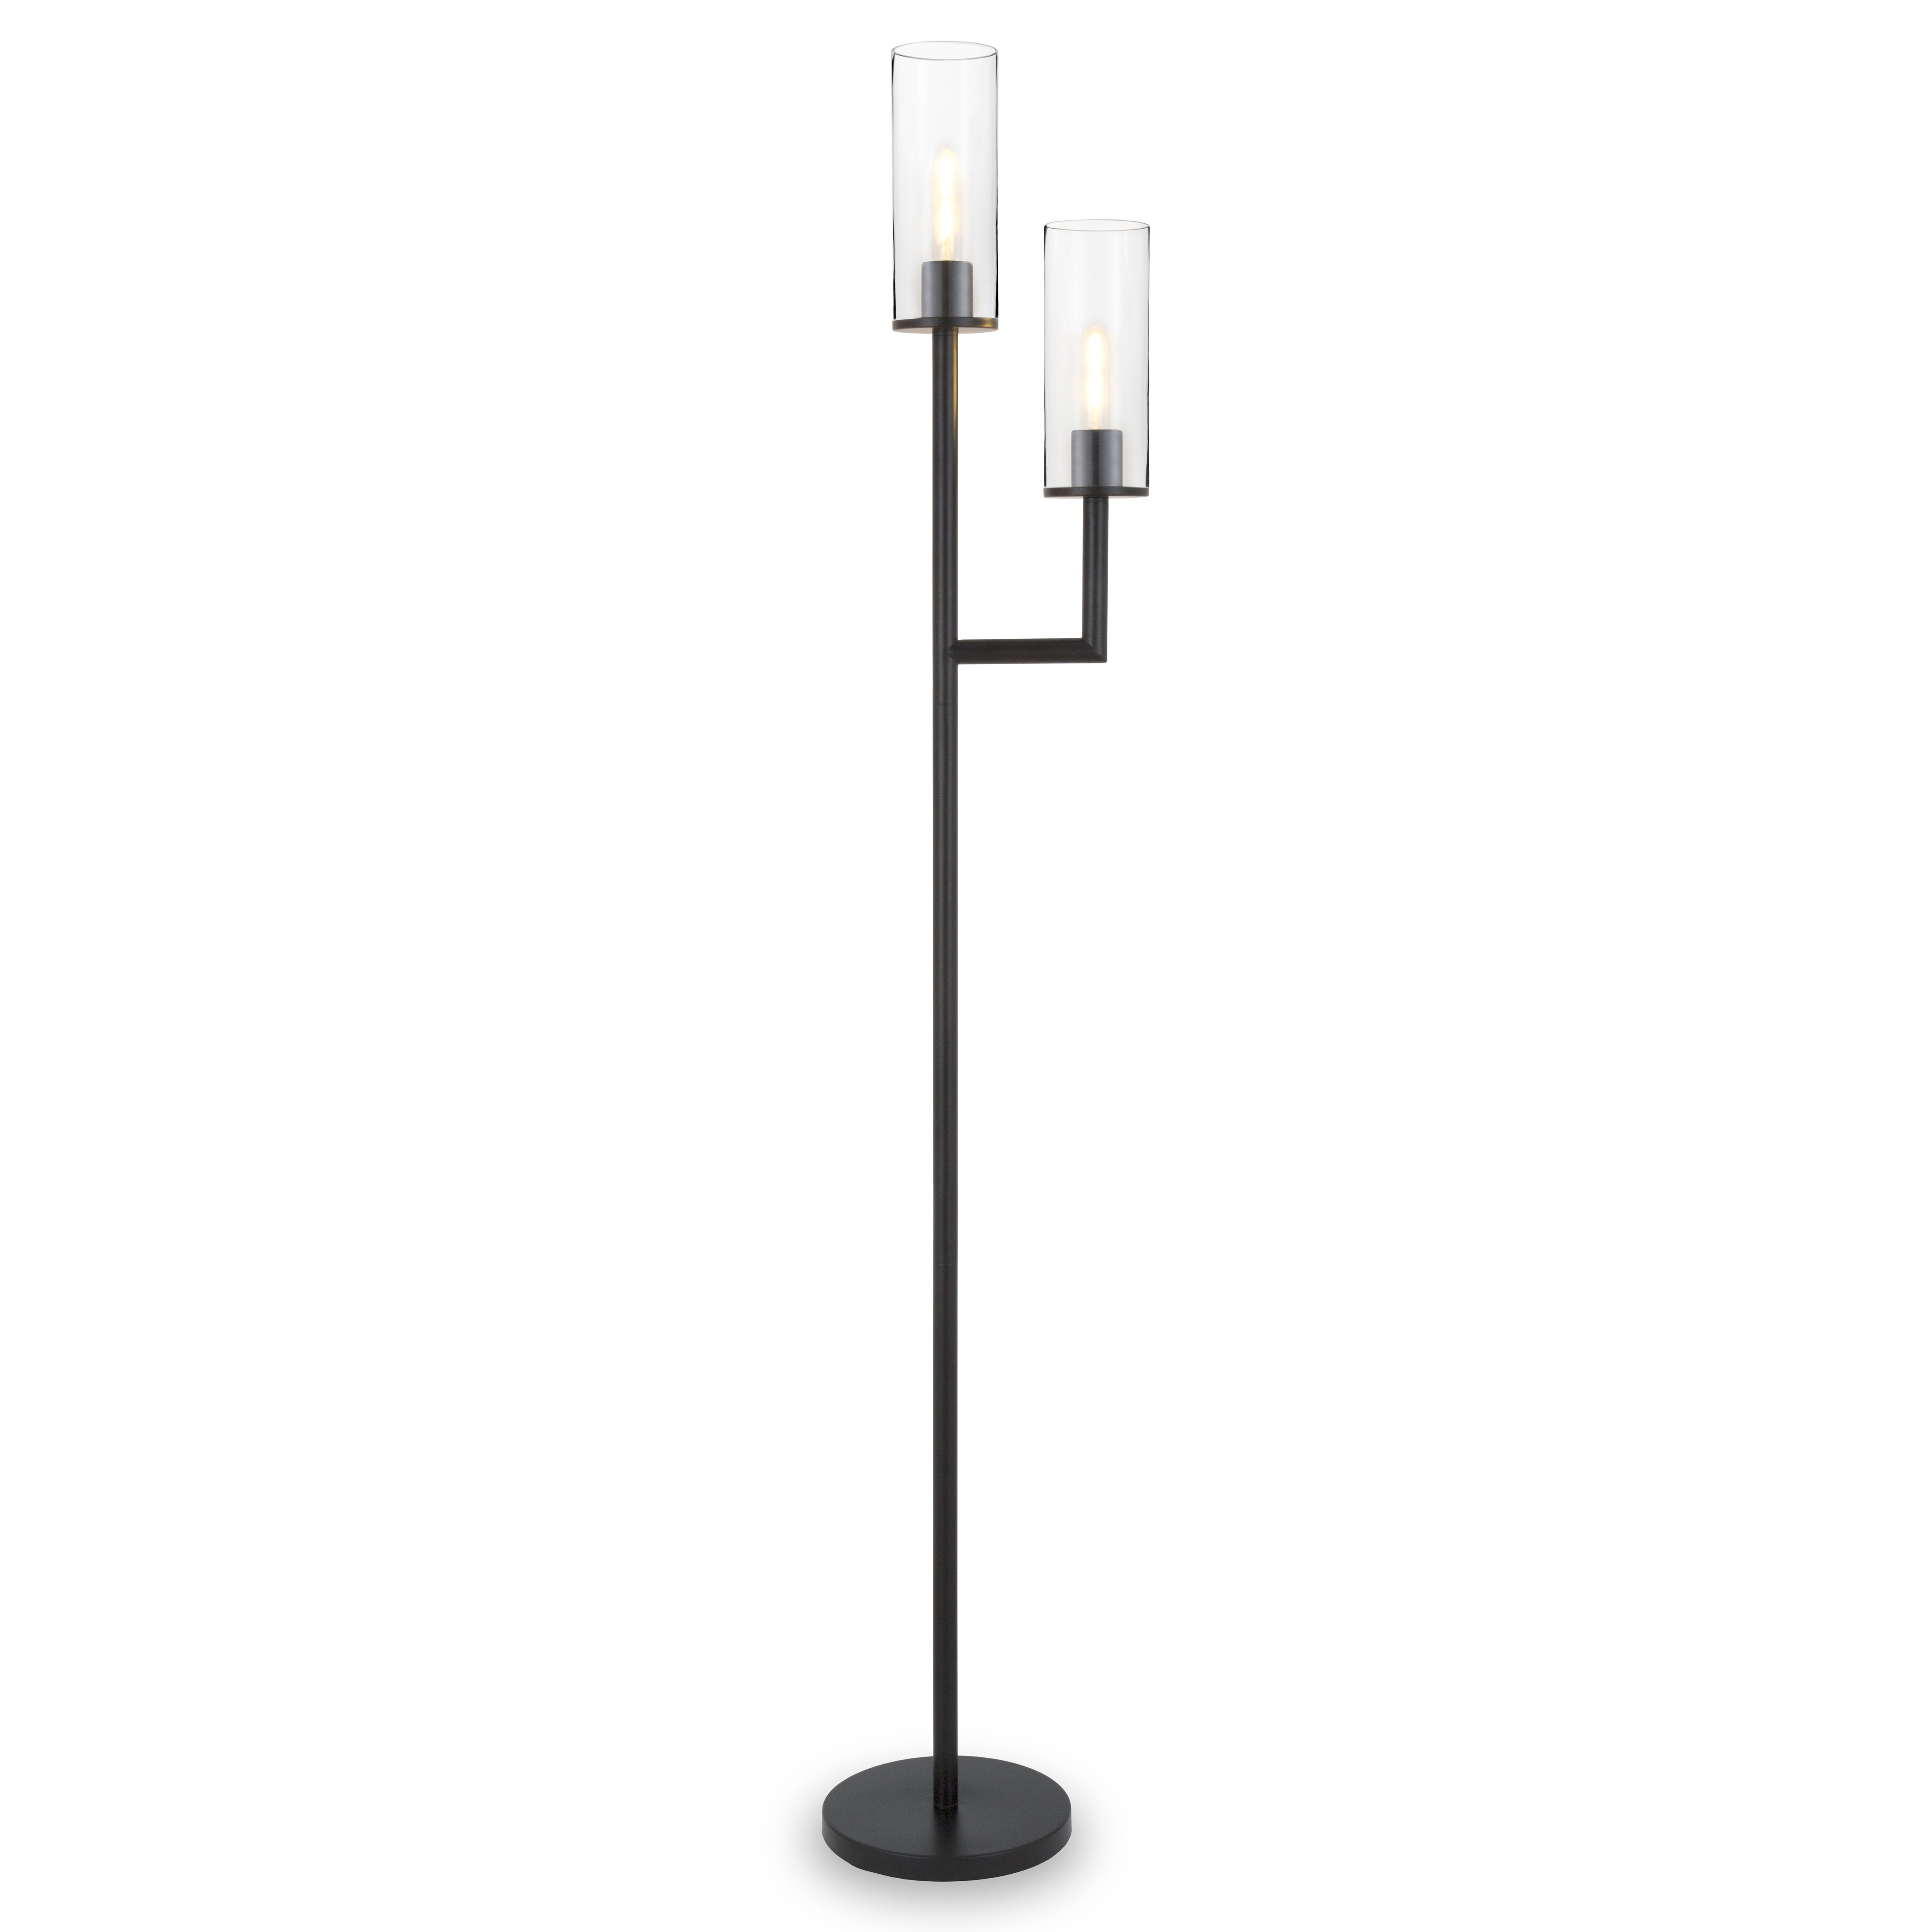 Light Torchiere Floor Lamp, Black Torchiere Floor Lamp With Glass Shade